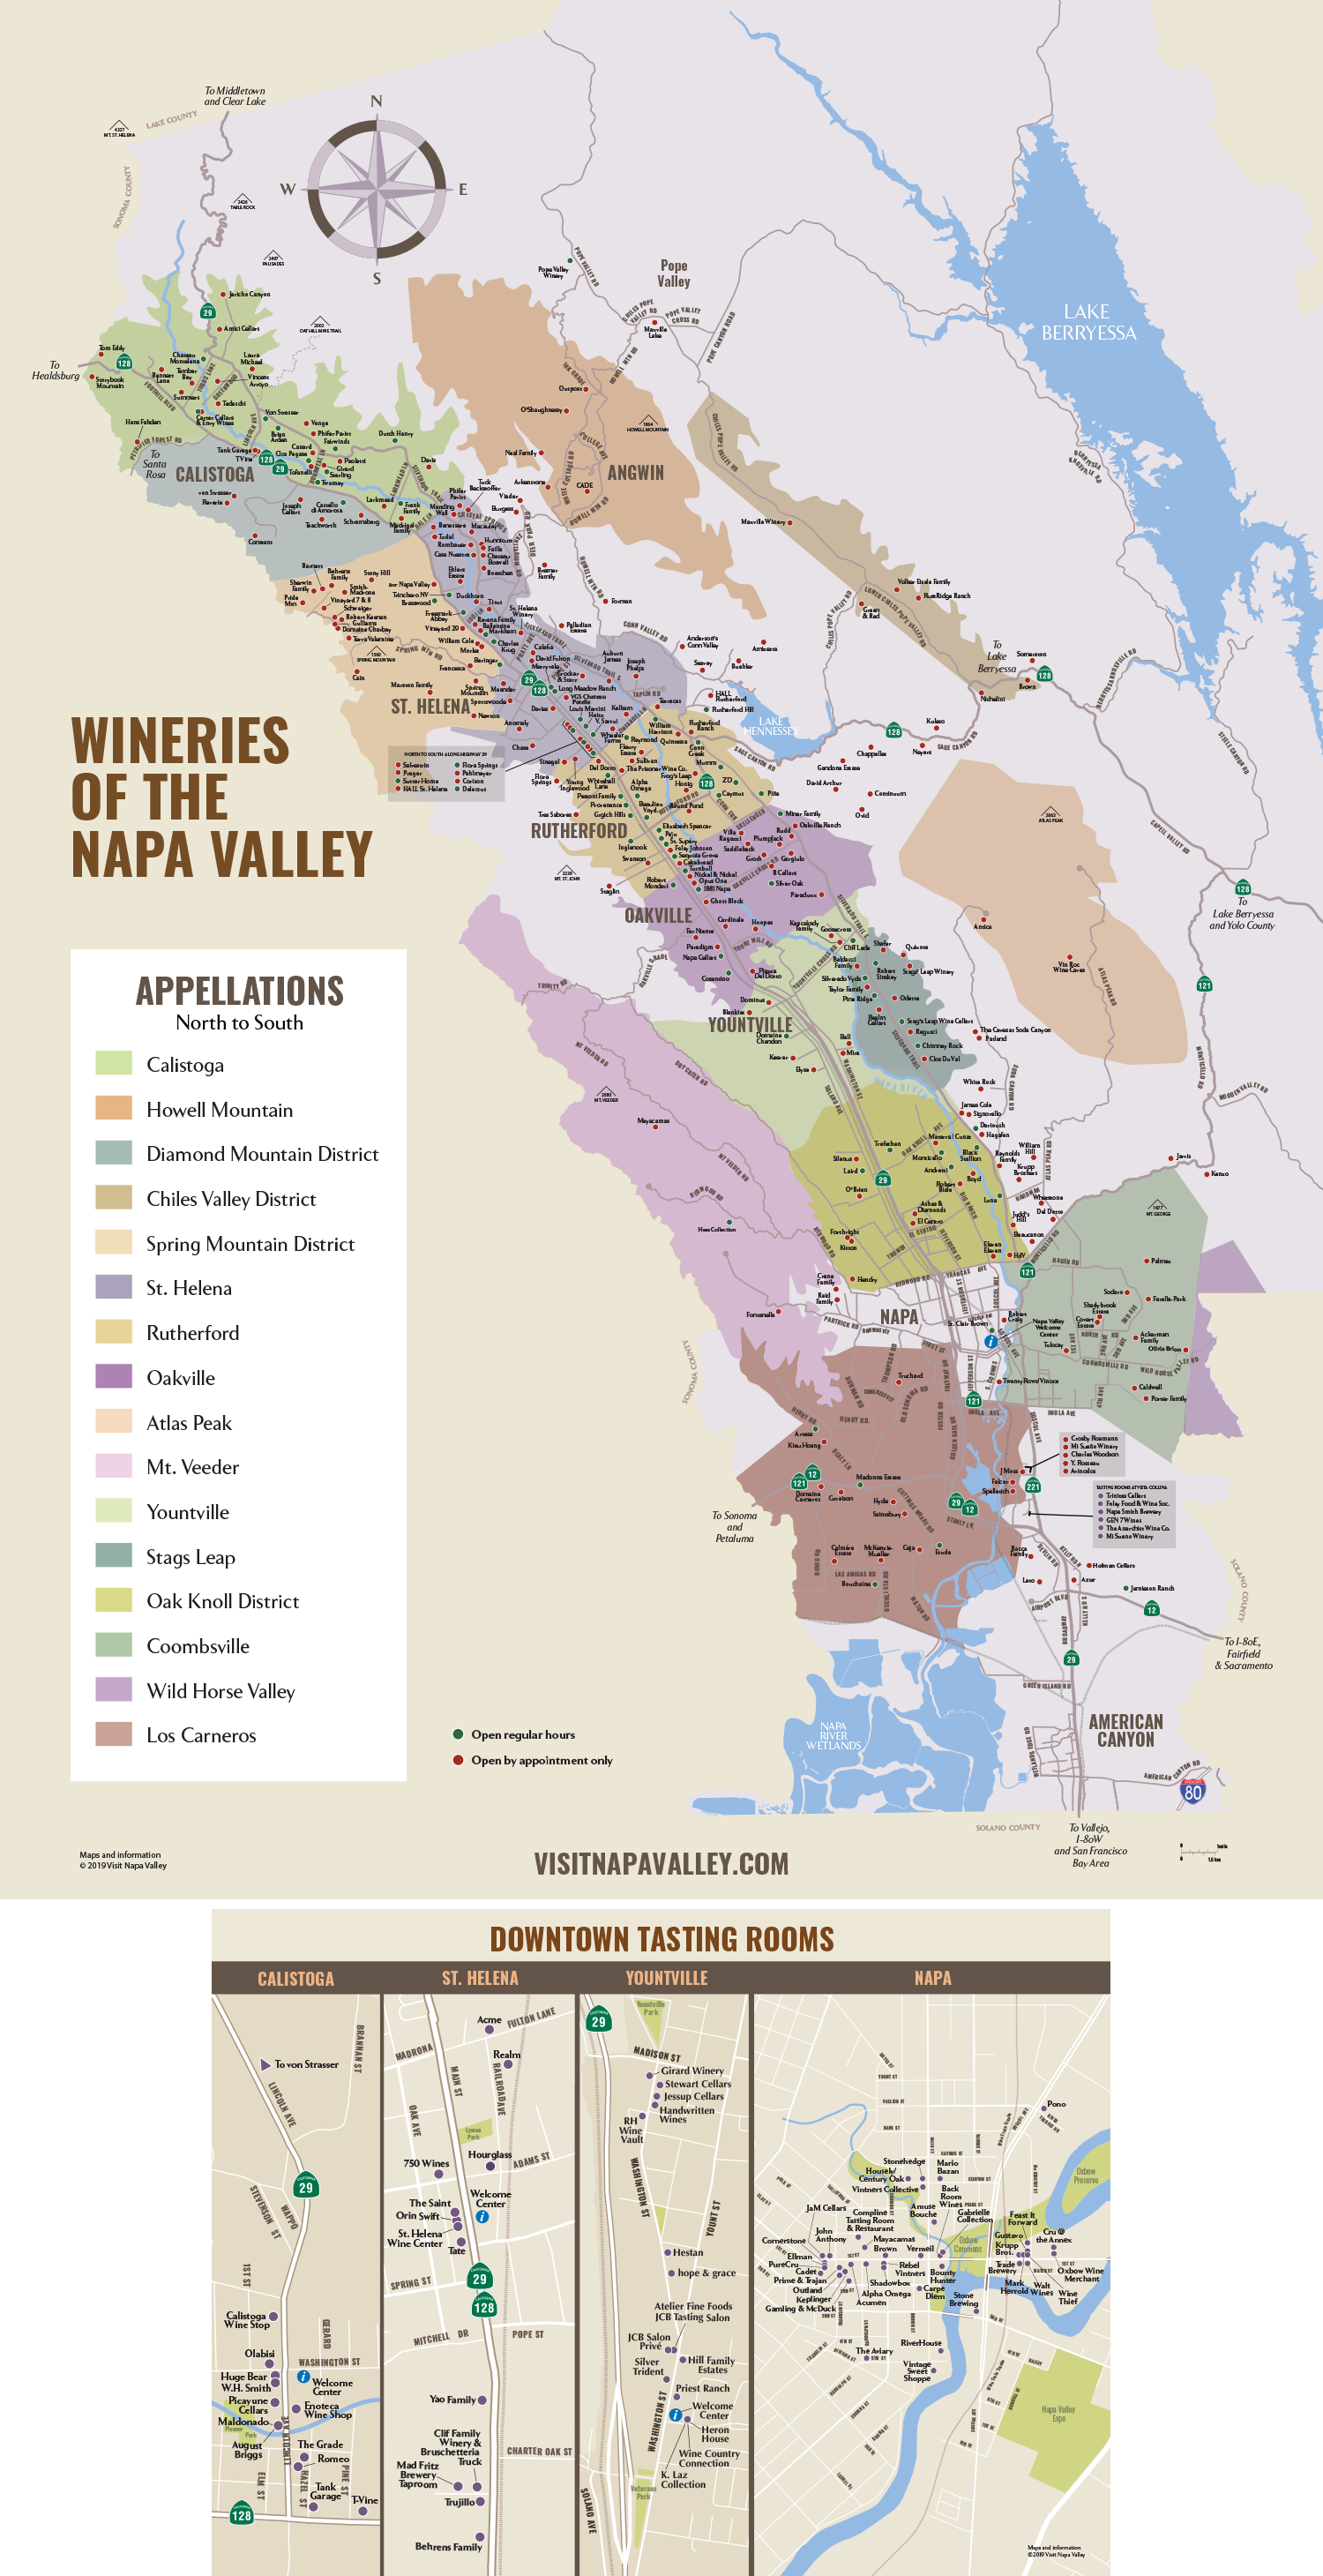 map of napa valley Napa Valley Winery Map Plan Your Visit To Our Wineries